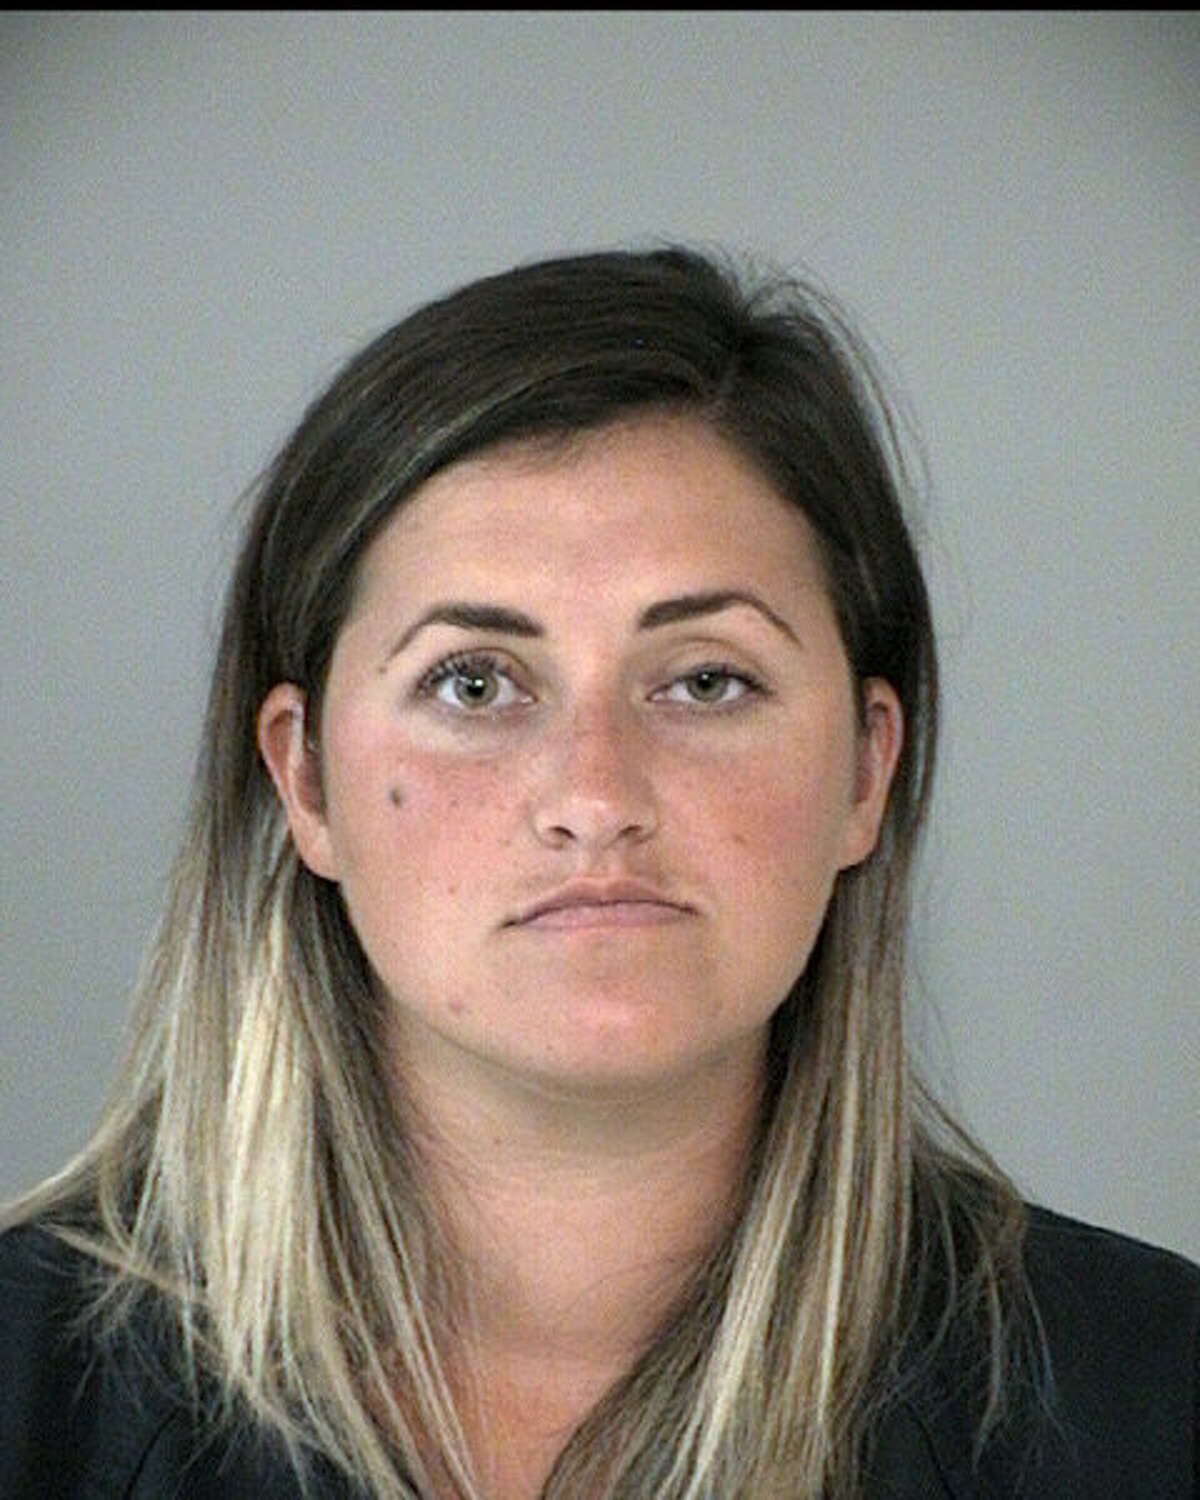 Shannon Coutouzis's mugshot is pictured. >> Keep clicking through the following gallery to see mugshots of those arrested on sex crime charges in Galveston County during June 2019.